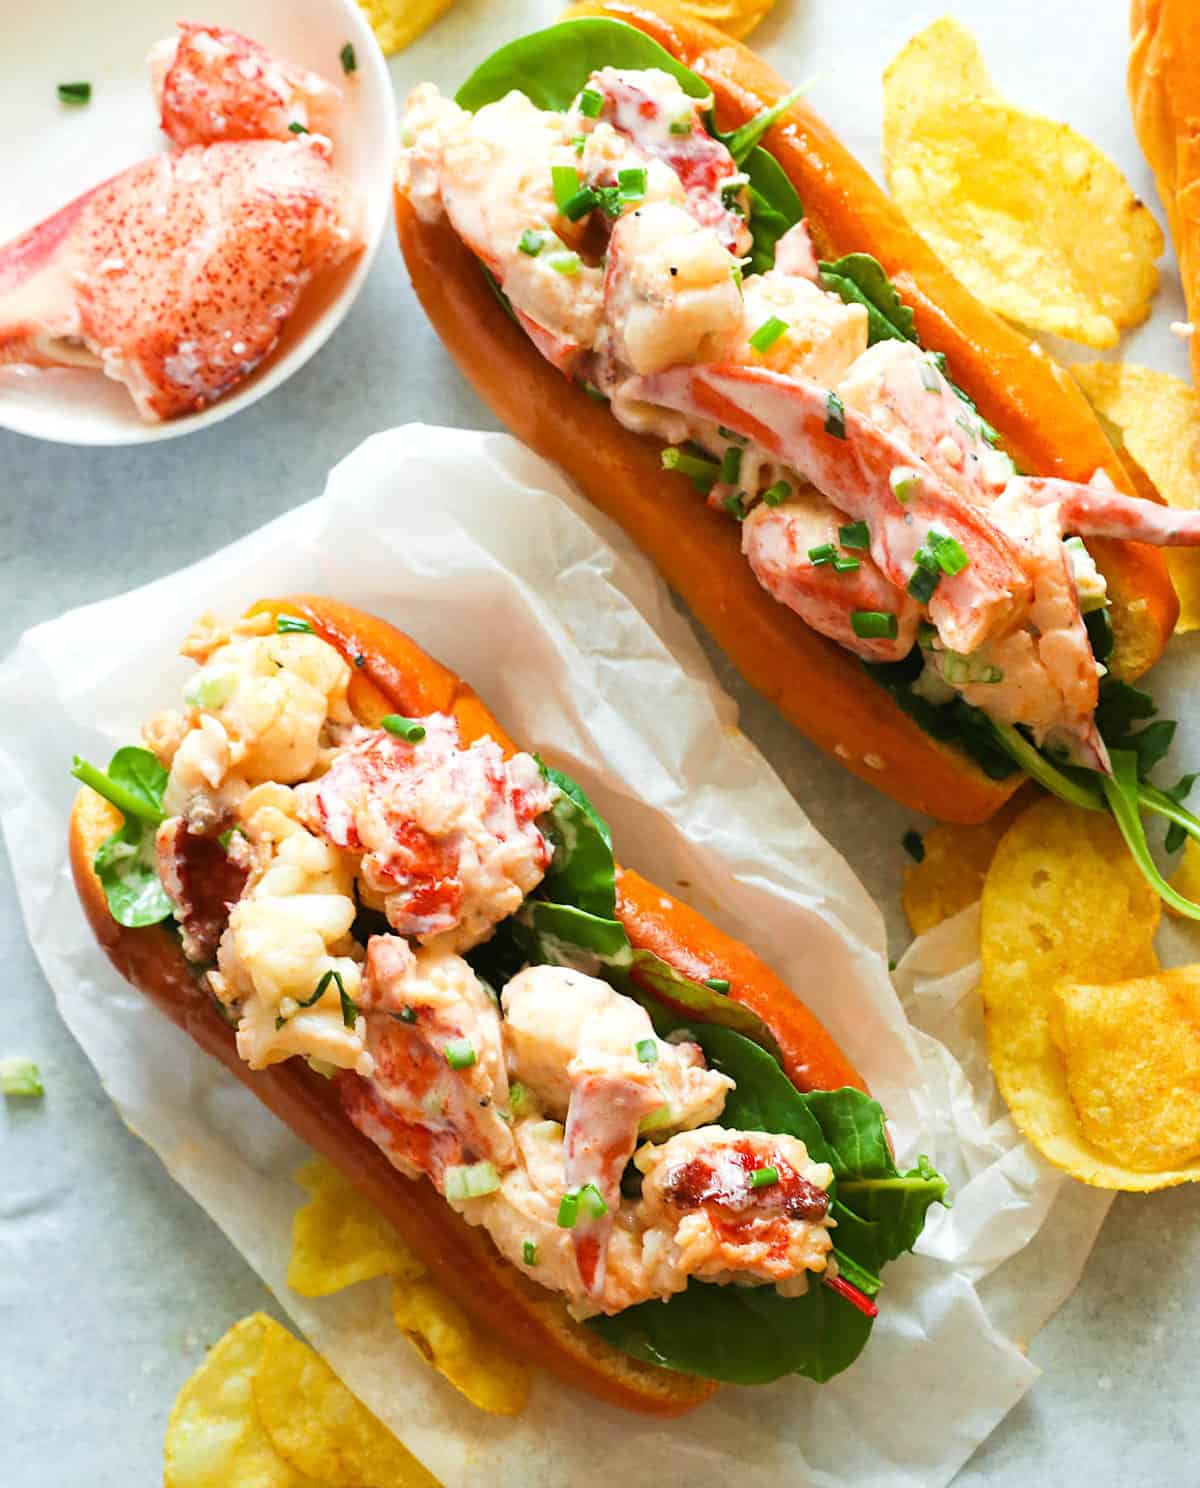 Enjoying classic comfort food in this lobster roll recipe